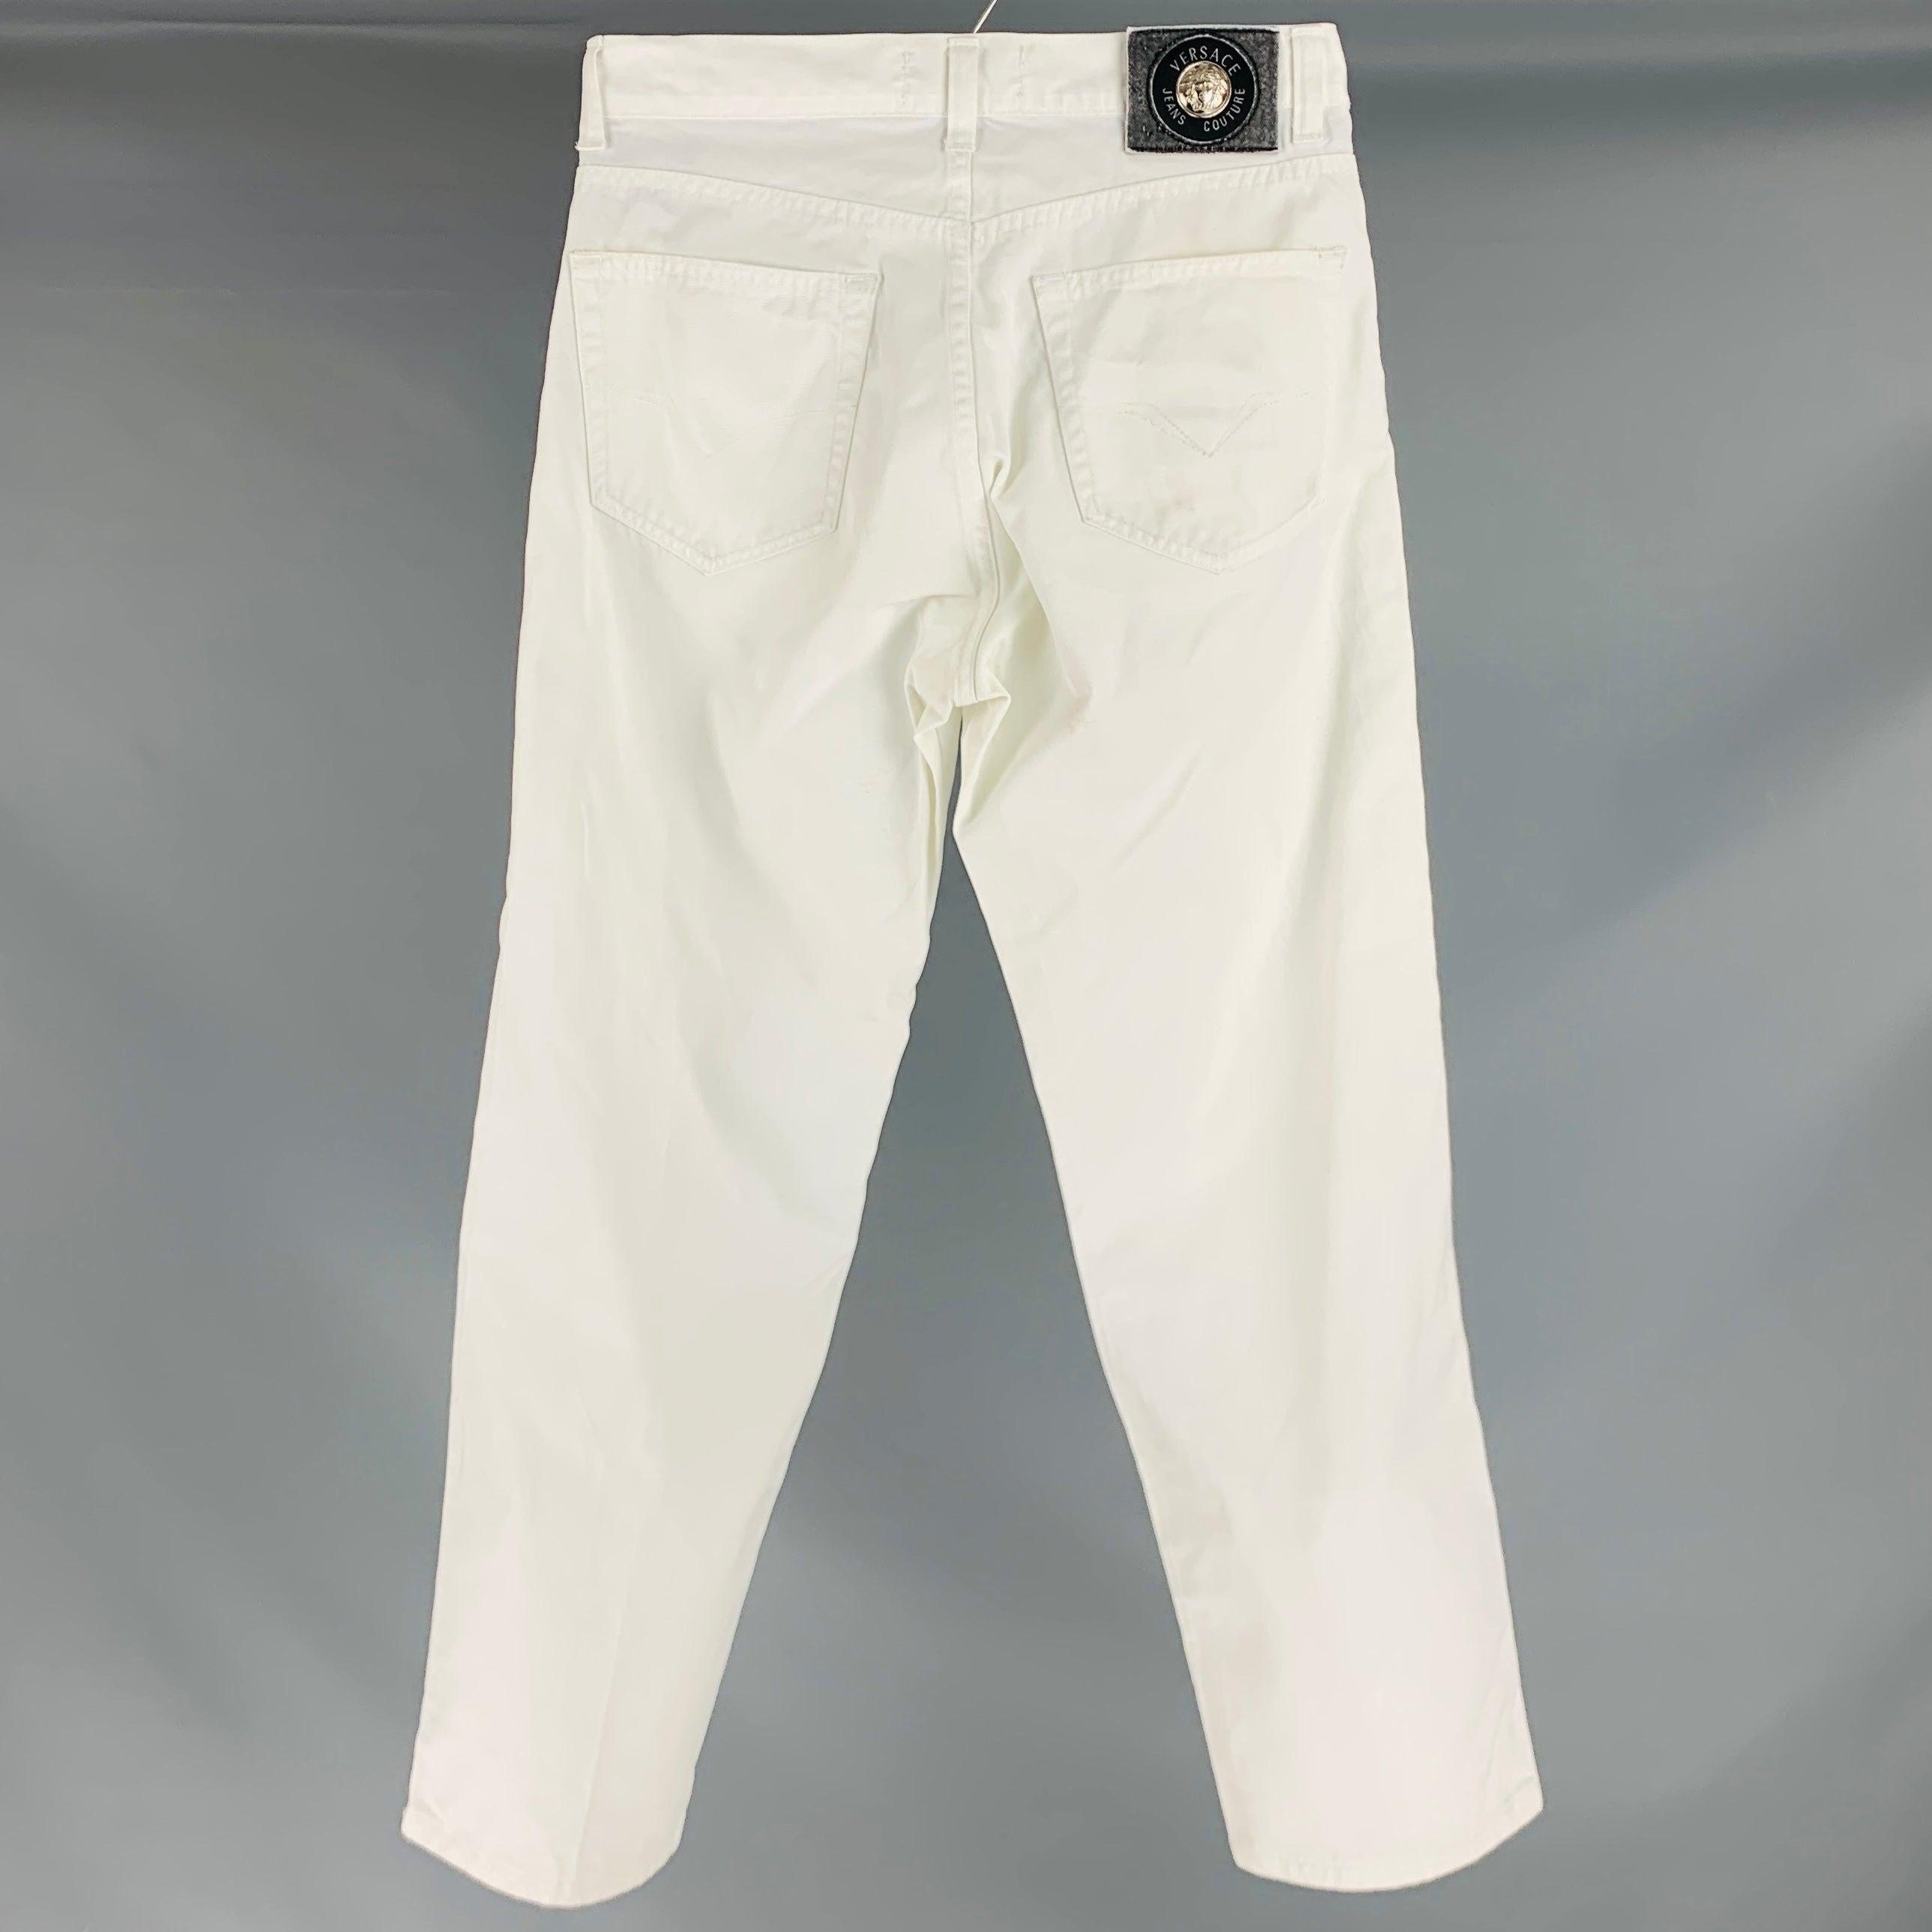 VERSACE JEANS COUTURE Size 30 White Denim 5 Pocket Jeans In Good Condition For Sale In San Francisco, CA